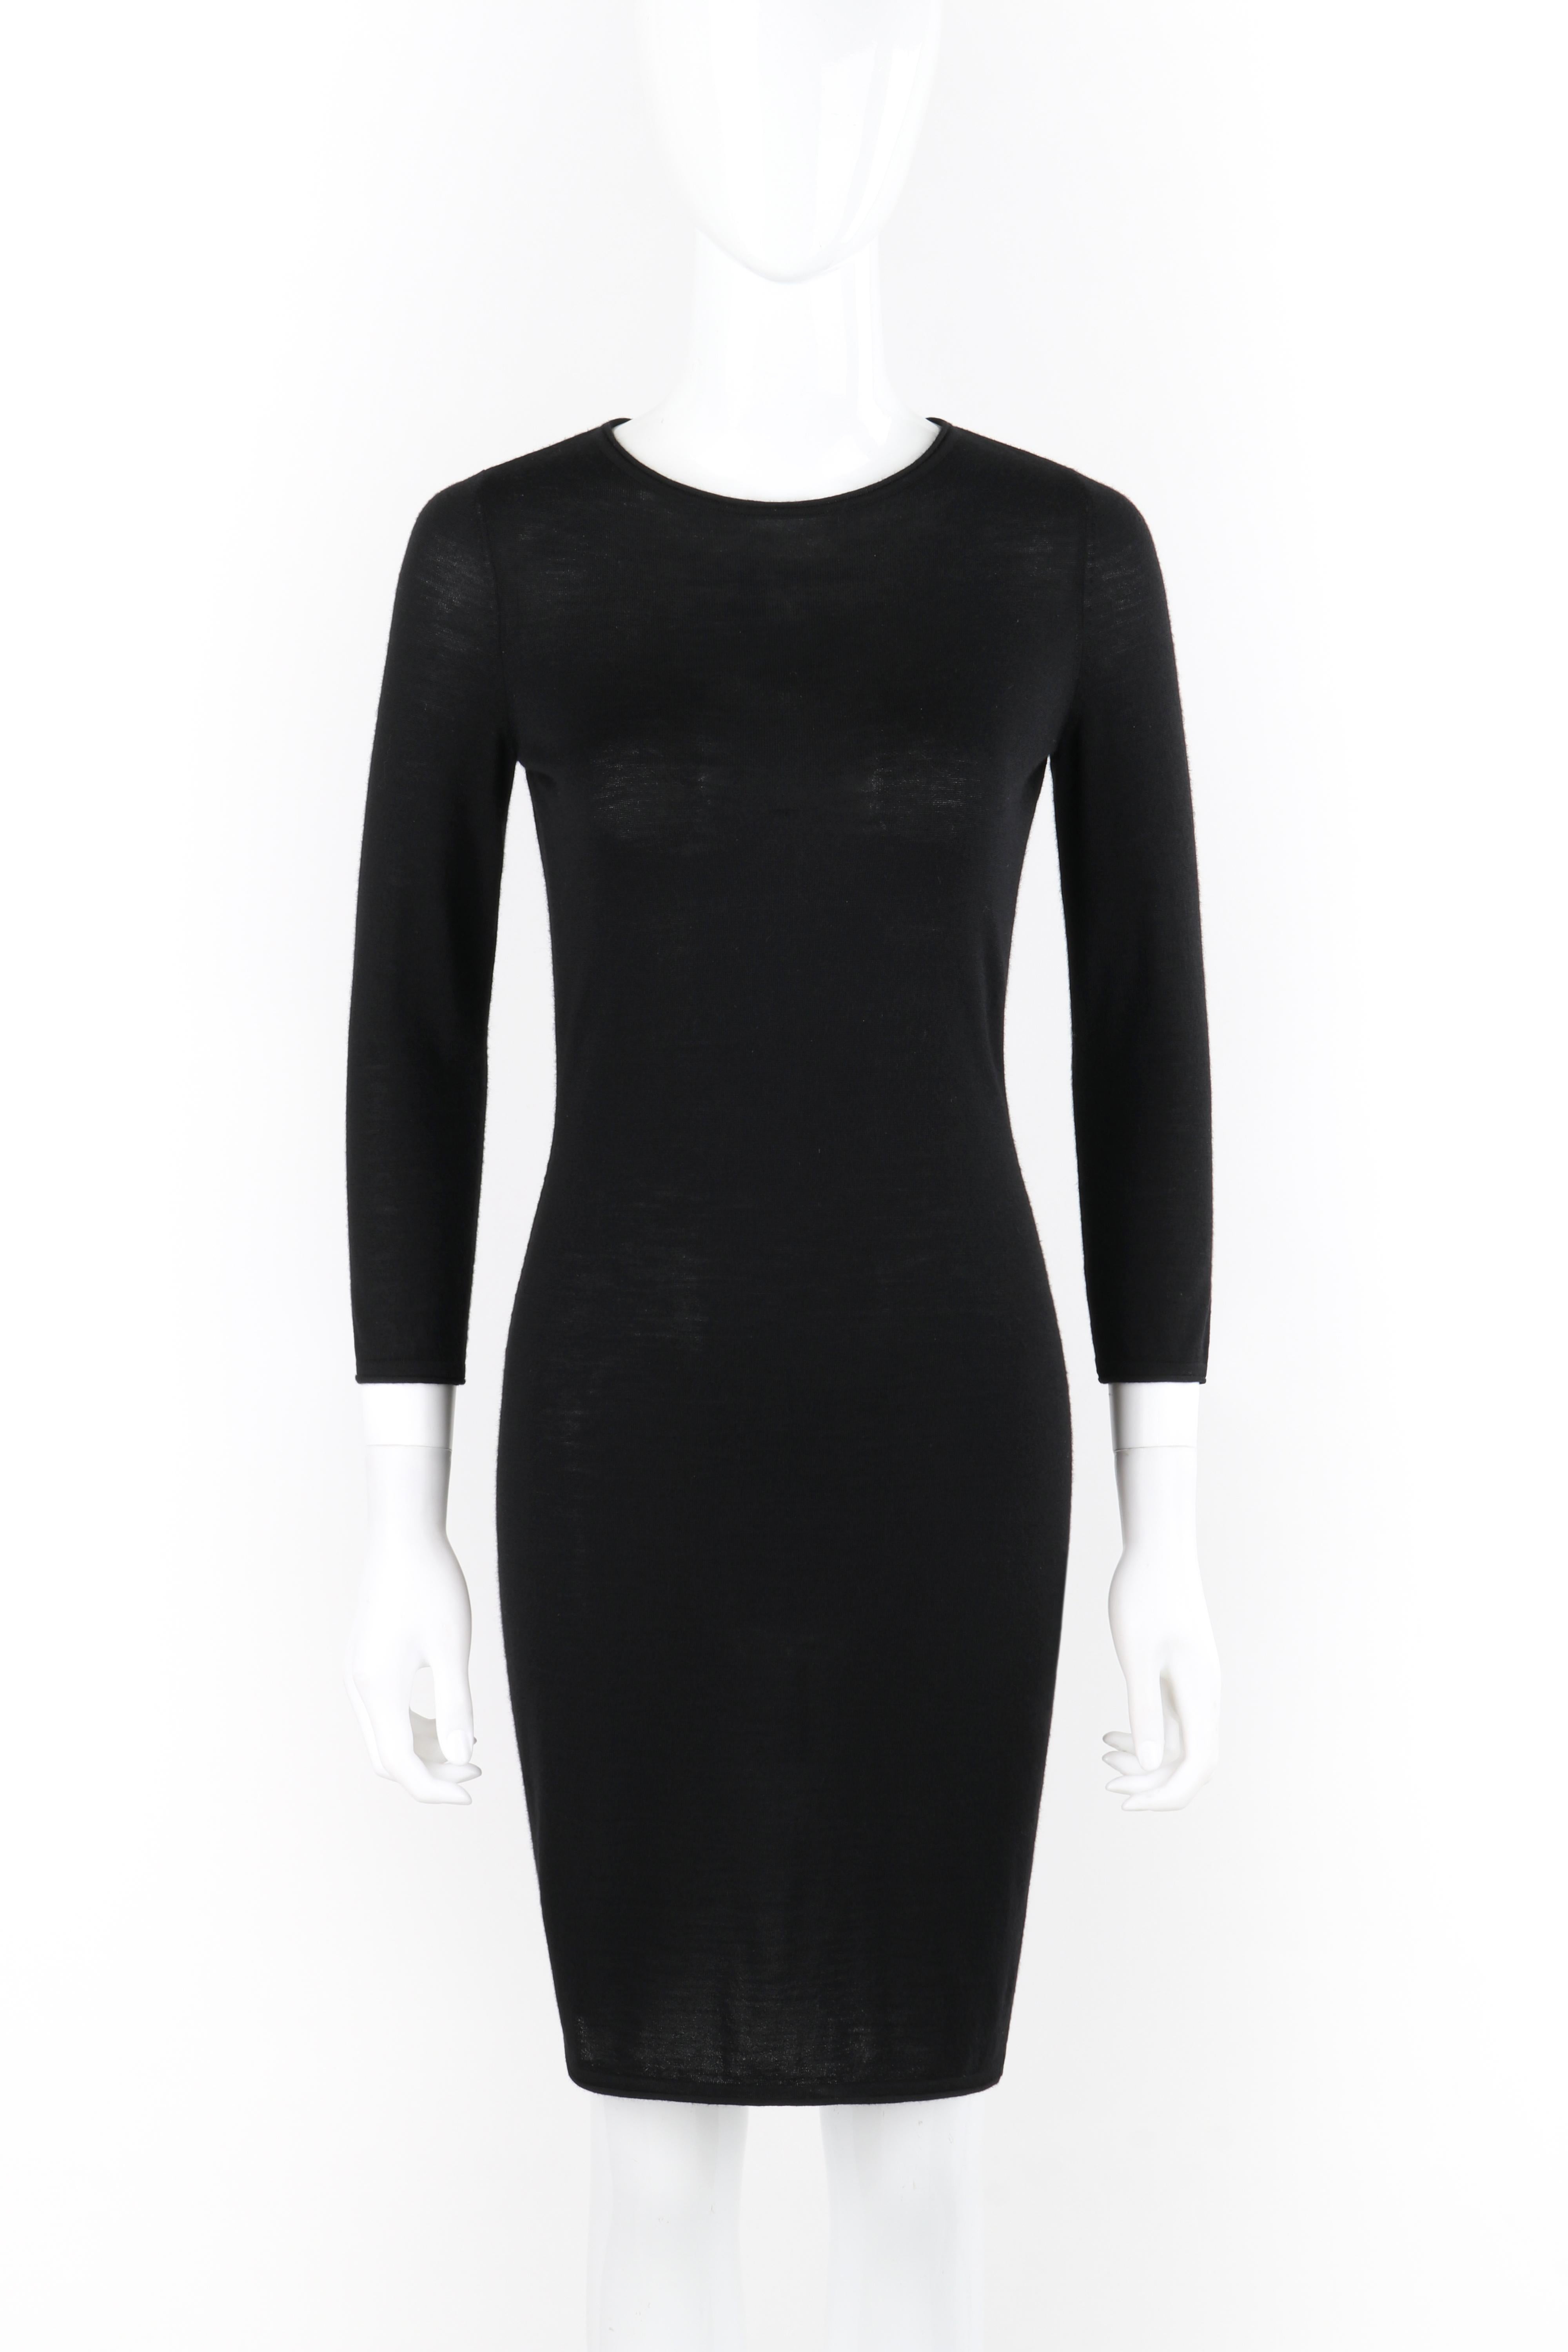 ALEXANDER McQUEEN F/W 2004 Black Knit Draped Open Back Tie Long Sleeve Dress In Good Condition For Sale In Thiensville, WI